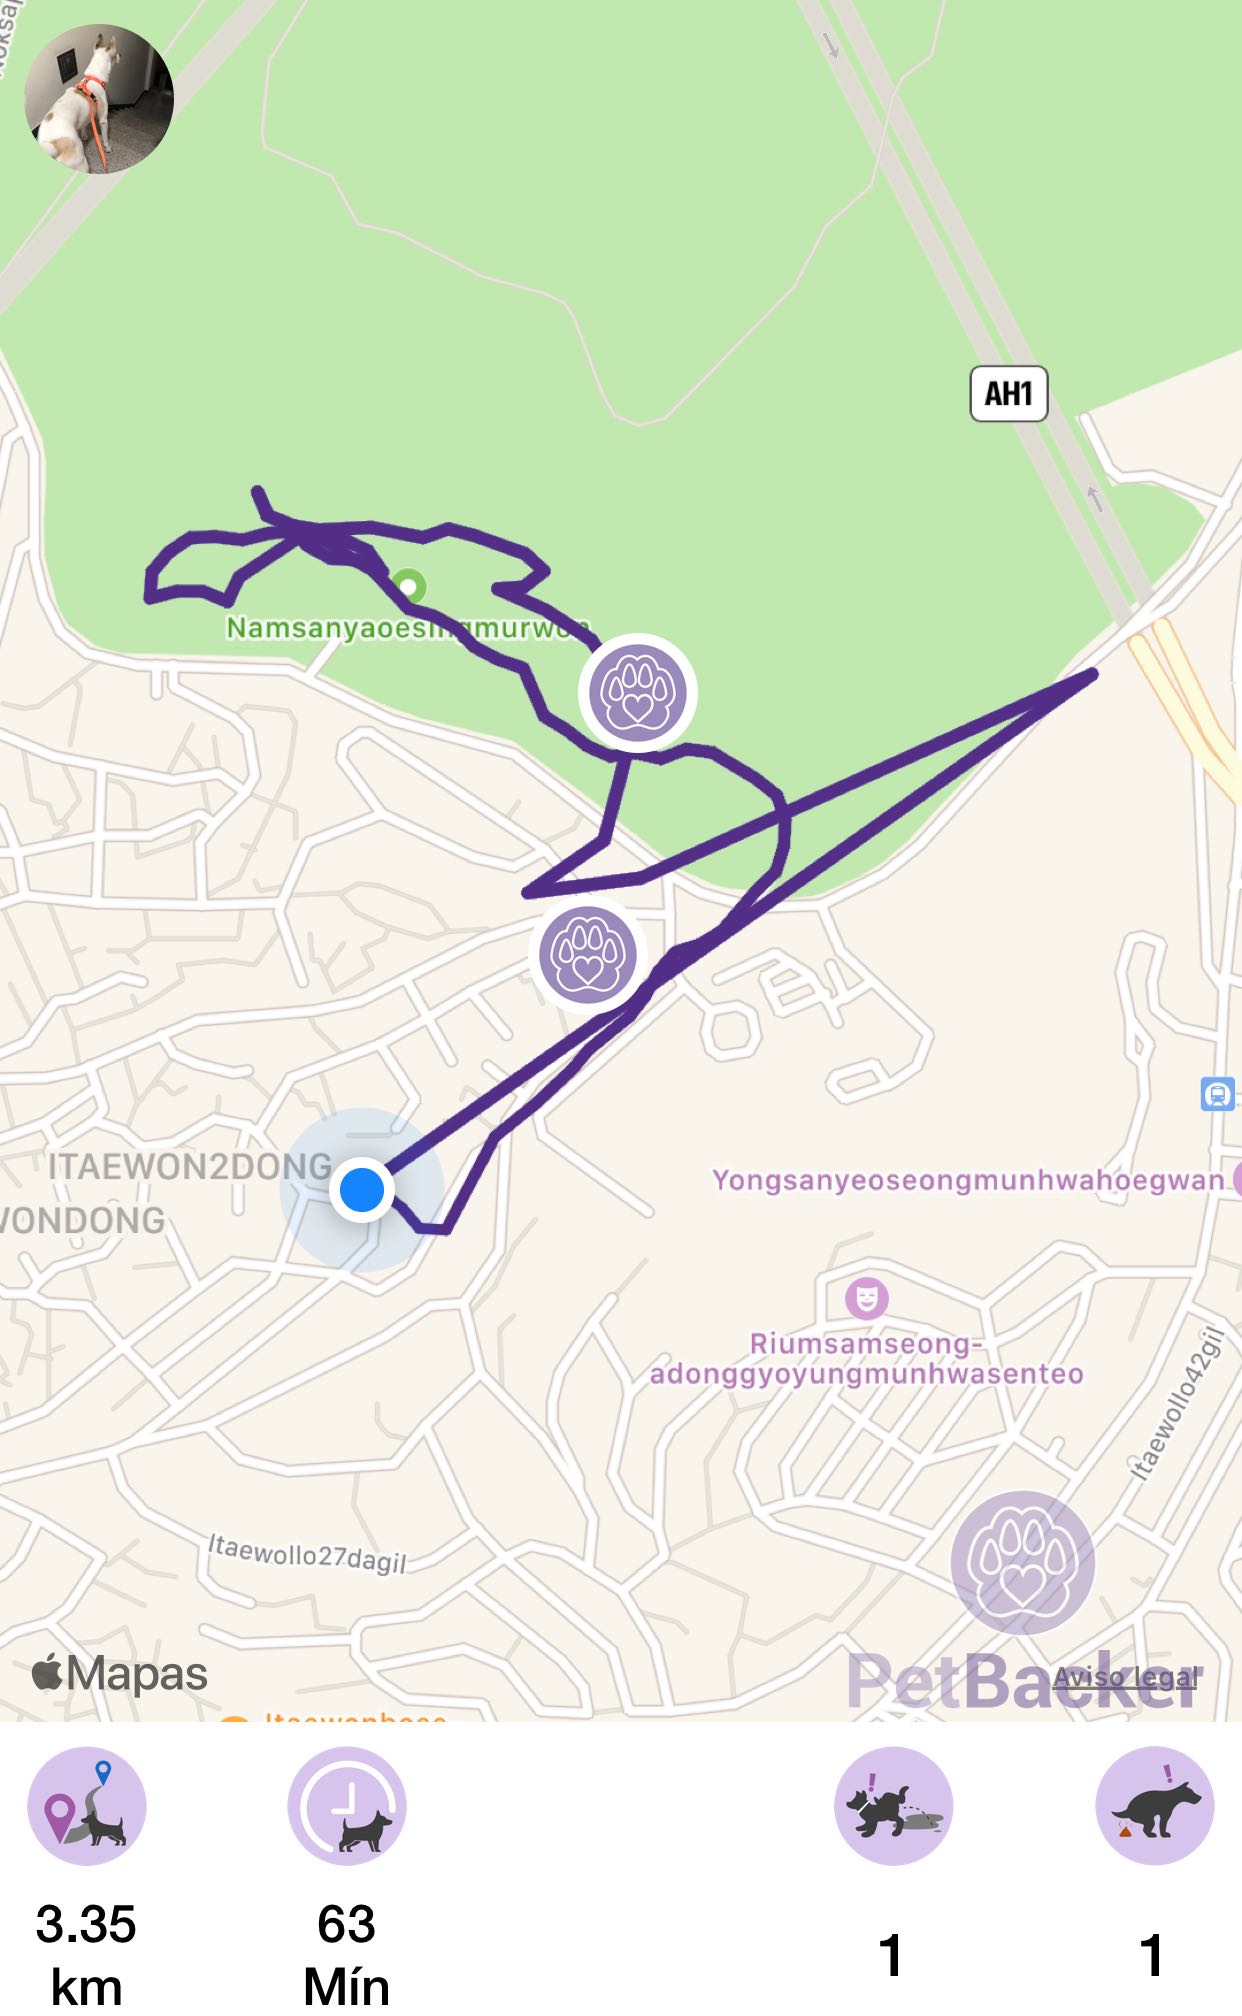 Just completed pet walking of 3.35 km